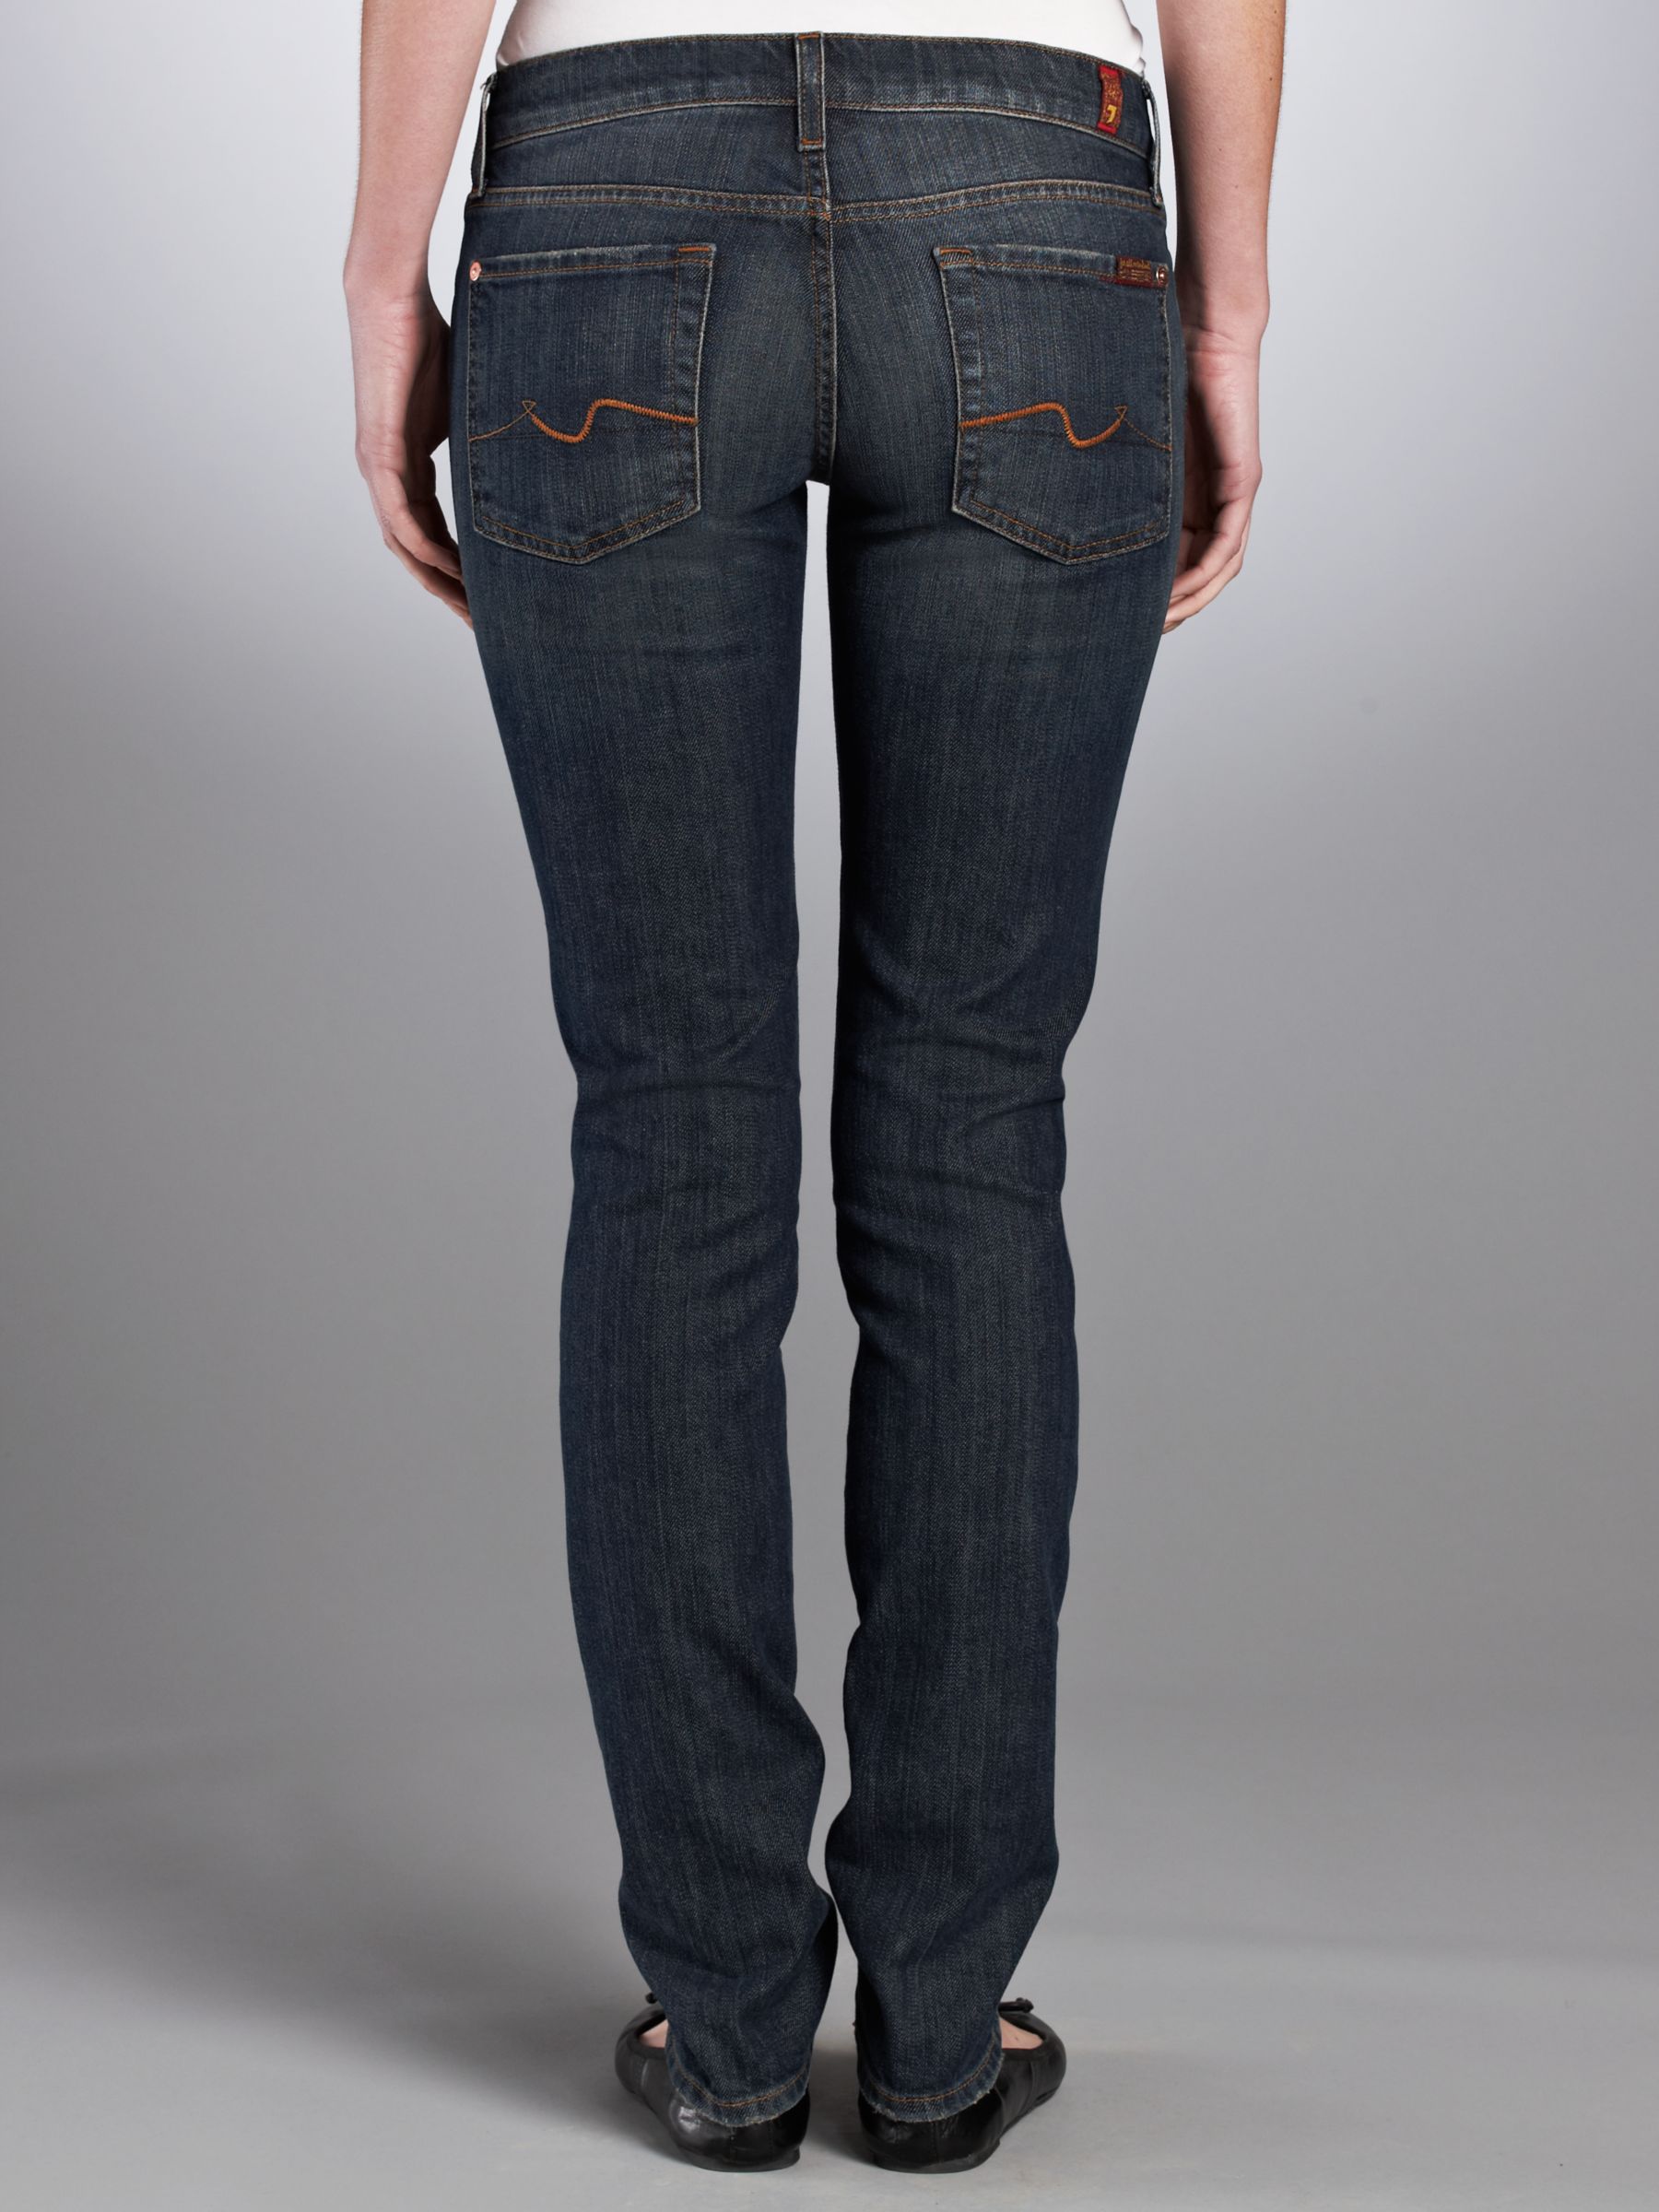 7 for all mankind roxanne skinny jeans